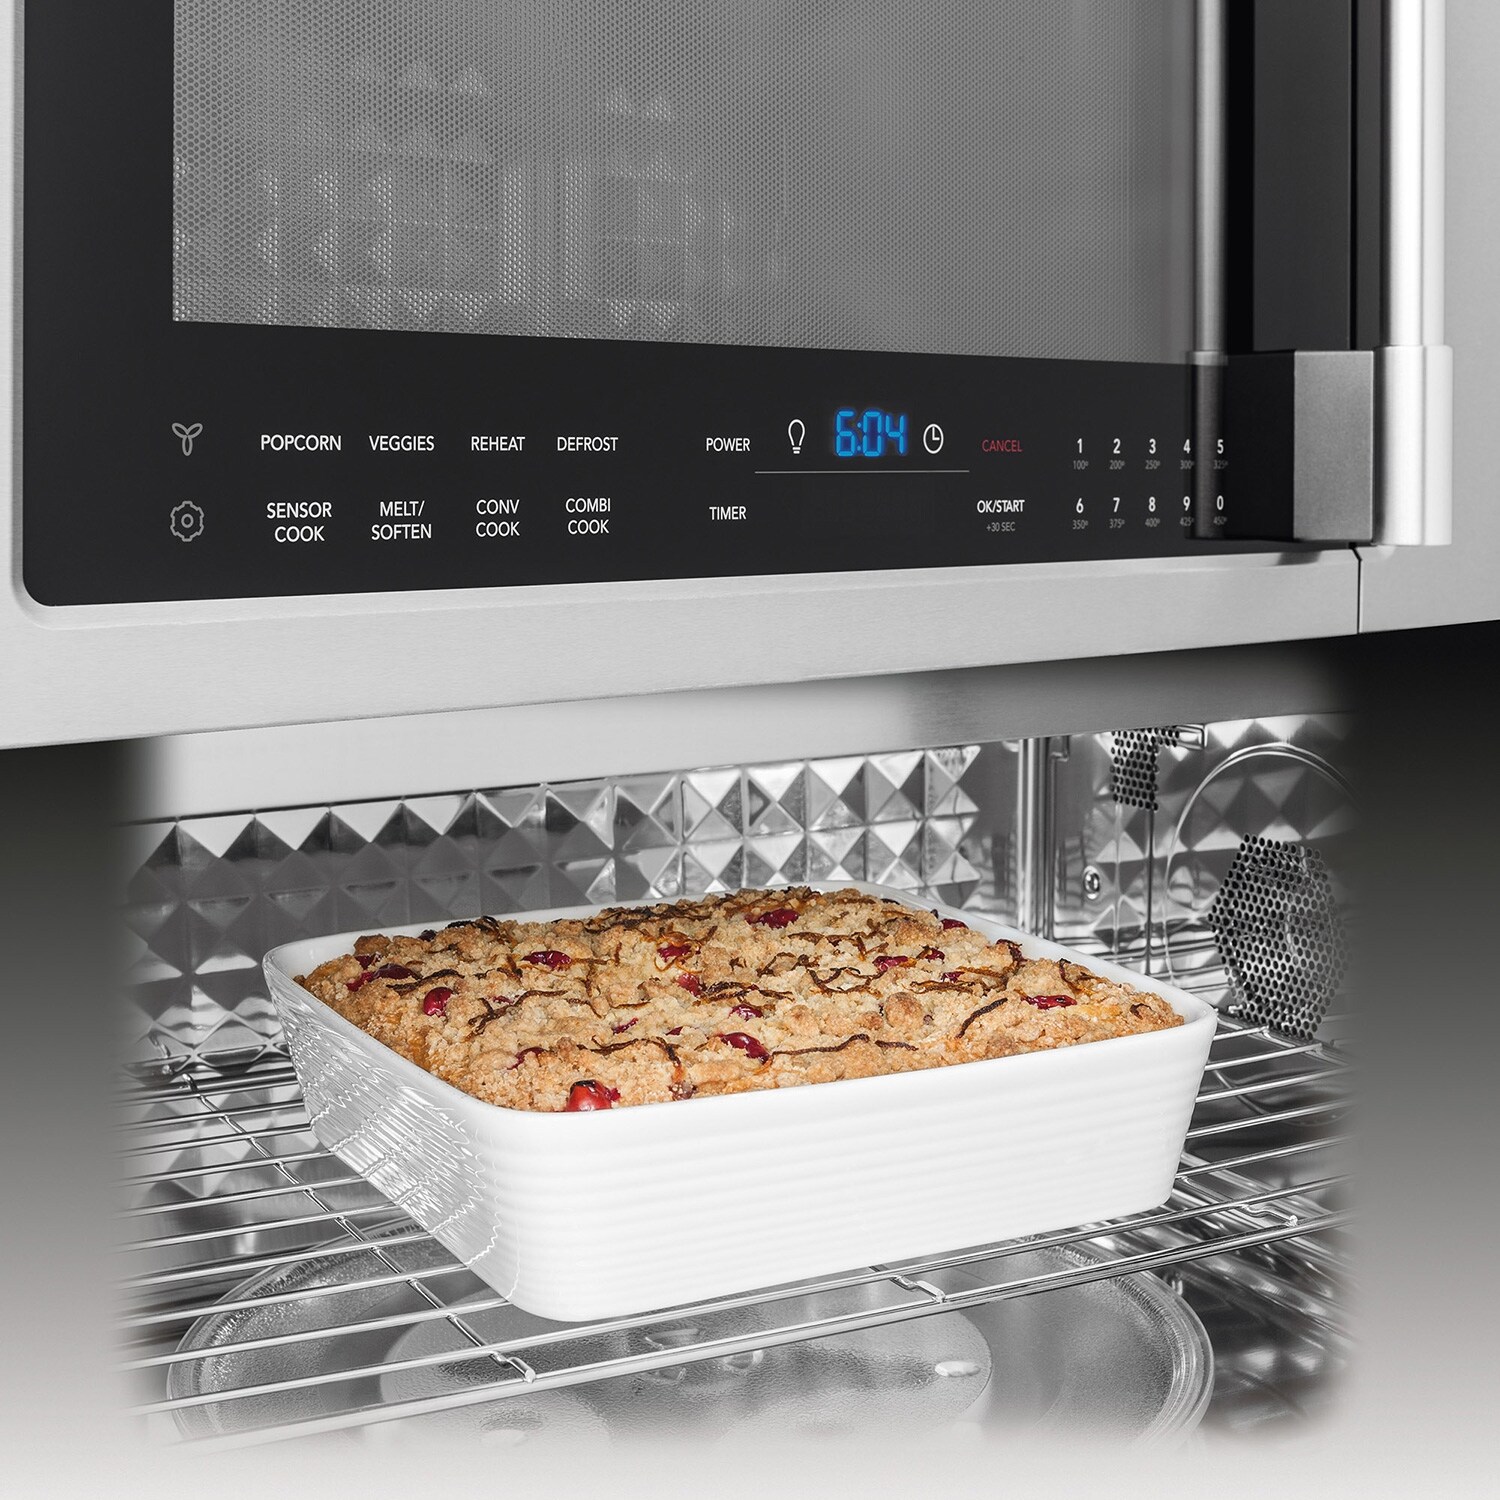 Frigidaire Professional Stainless Steel OvertheRange Microwave (1.8